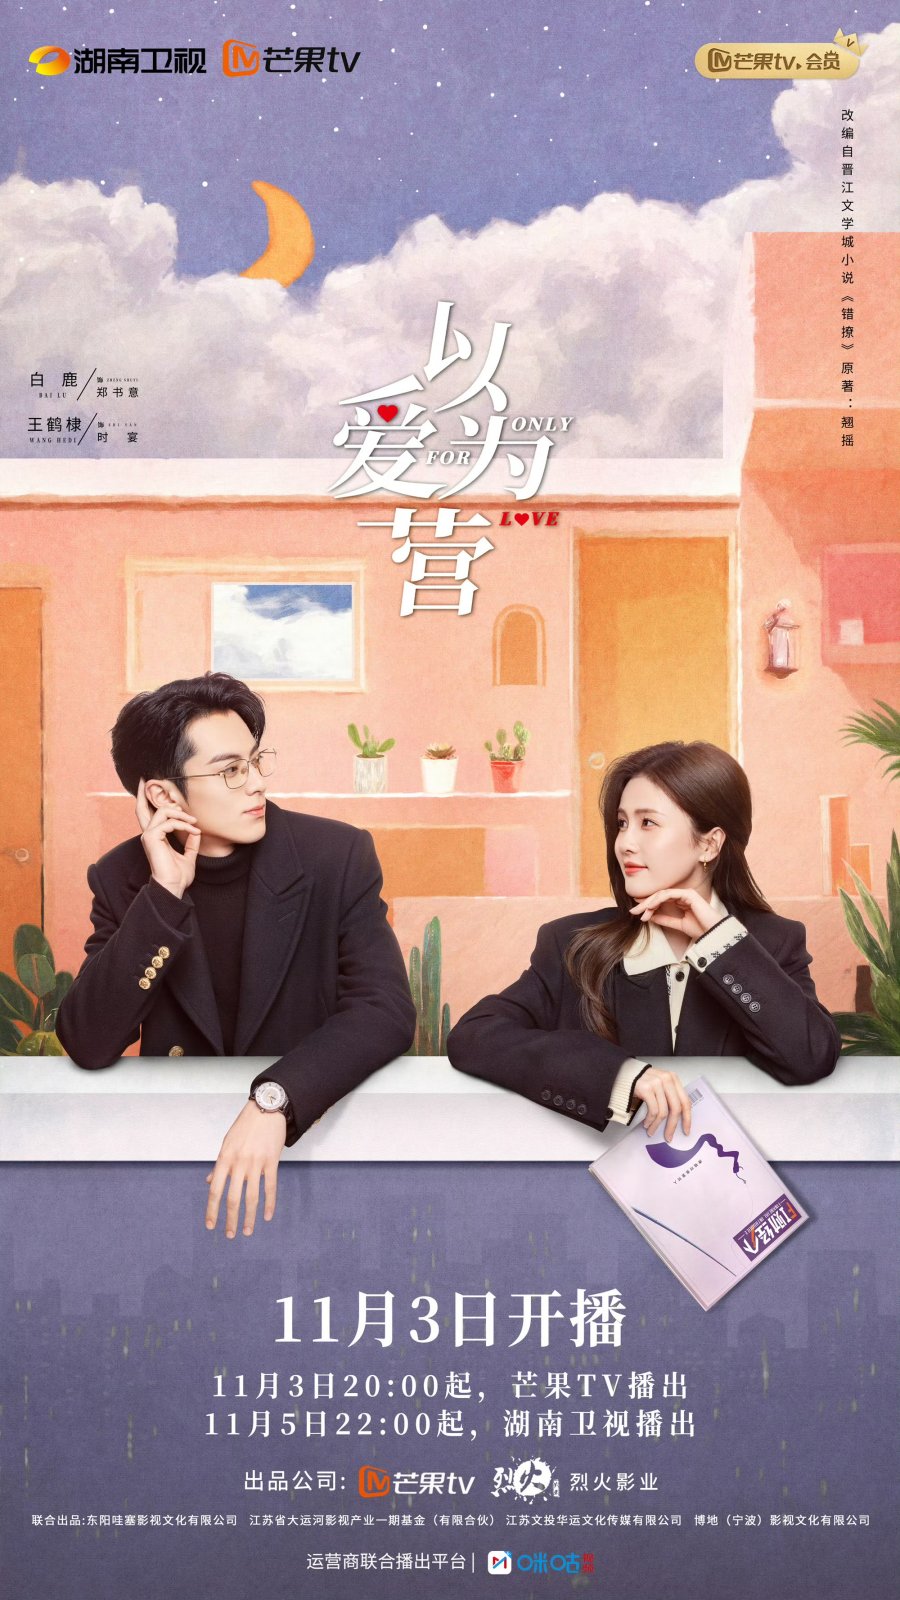 CDrama Review: Accidentally in Love | A Library of Sorts